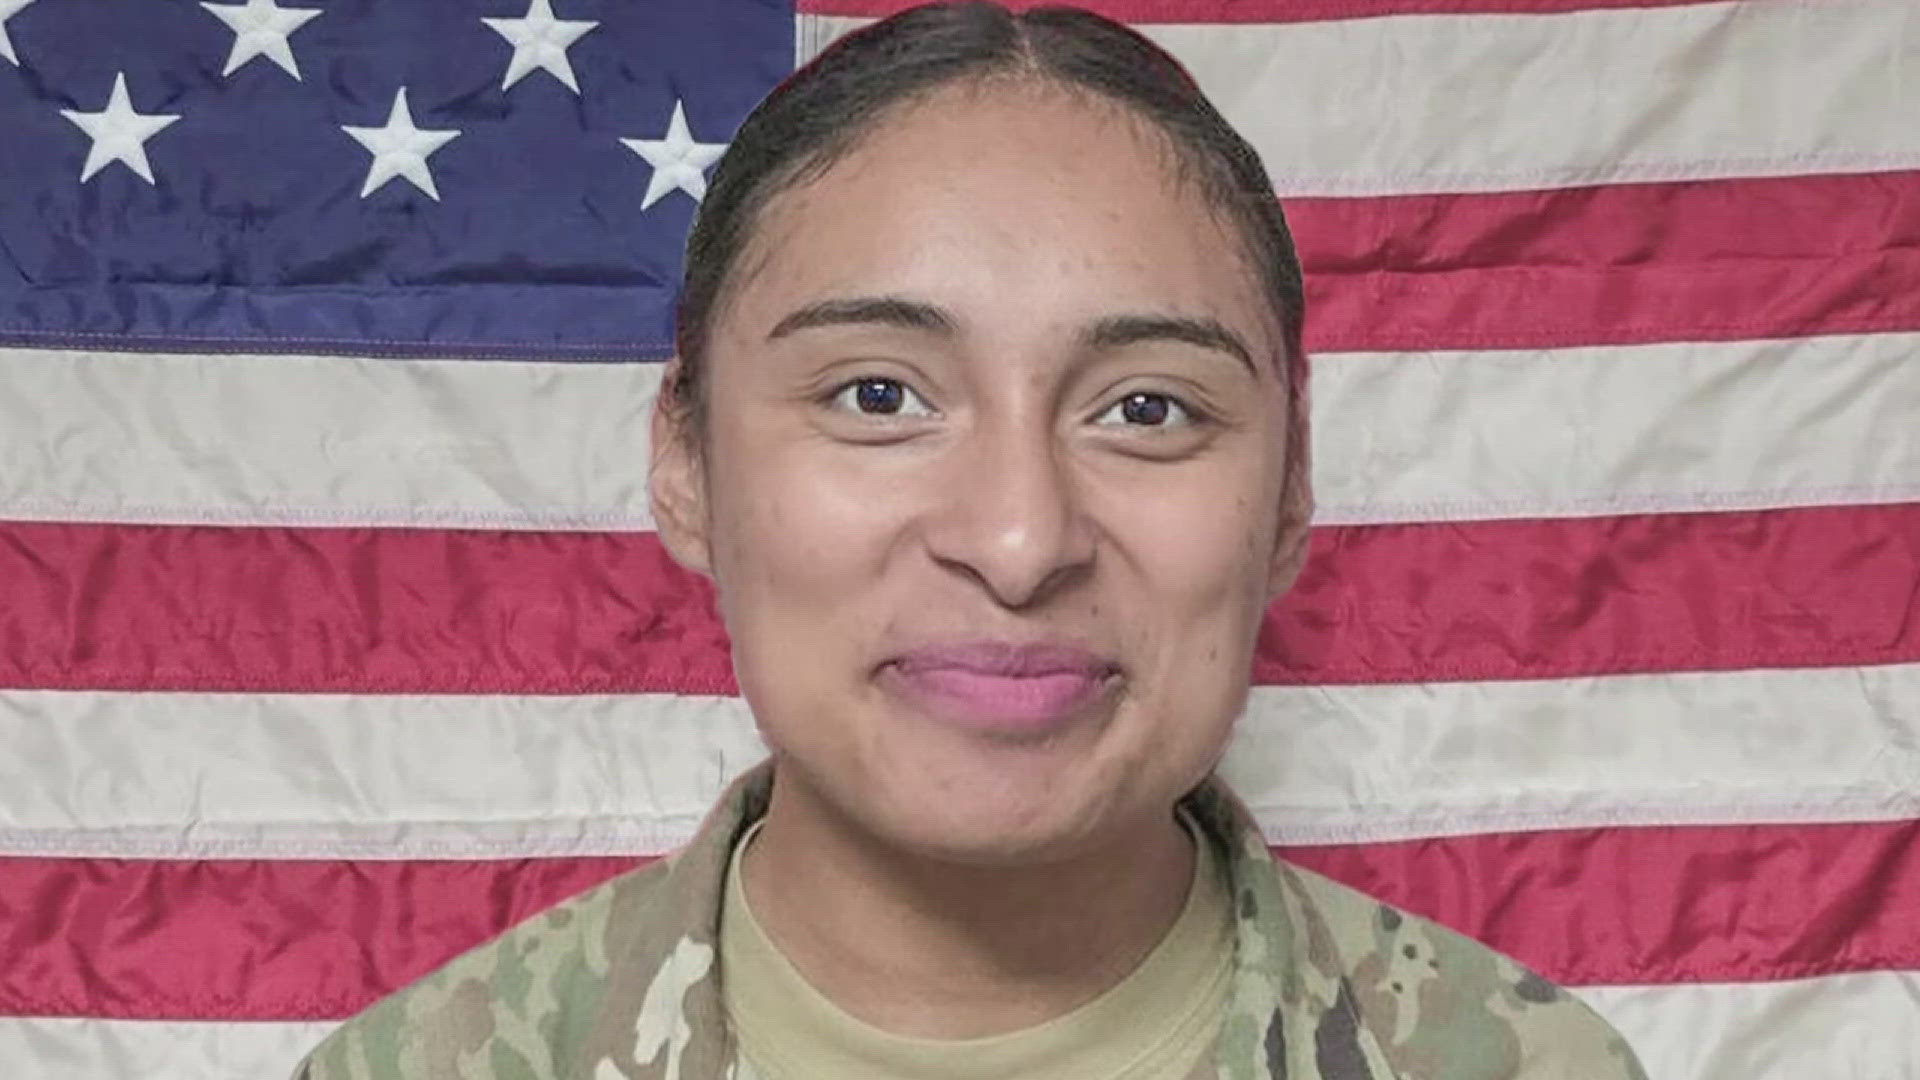 The soldier, 23-year-old Katia Duenas-Aguilar of Mesquite was found murdered inside a home near the Kentucky-Tennessee border.